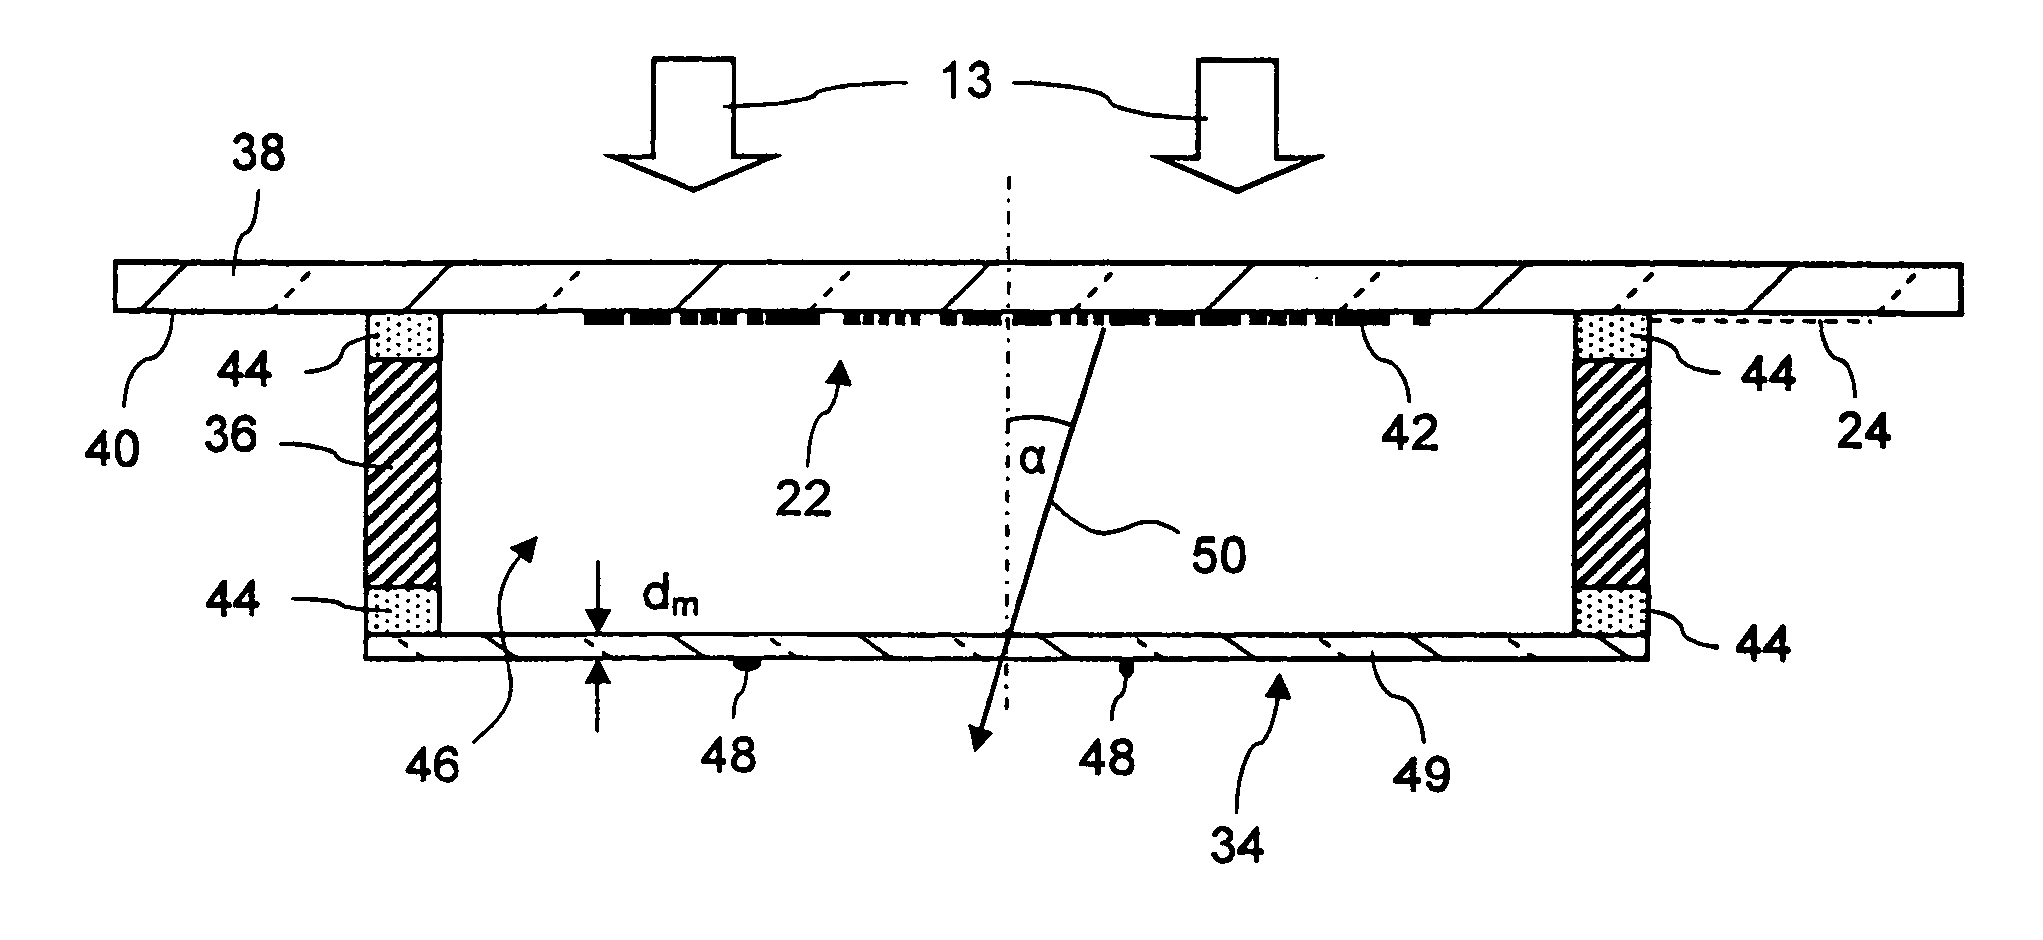 Pellicle for use in a microlithographic exposure apparatus